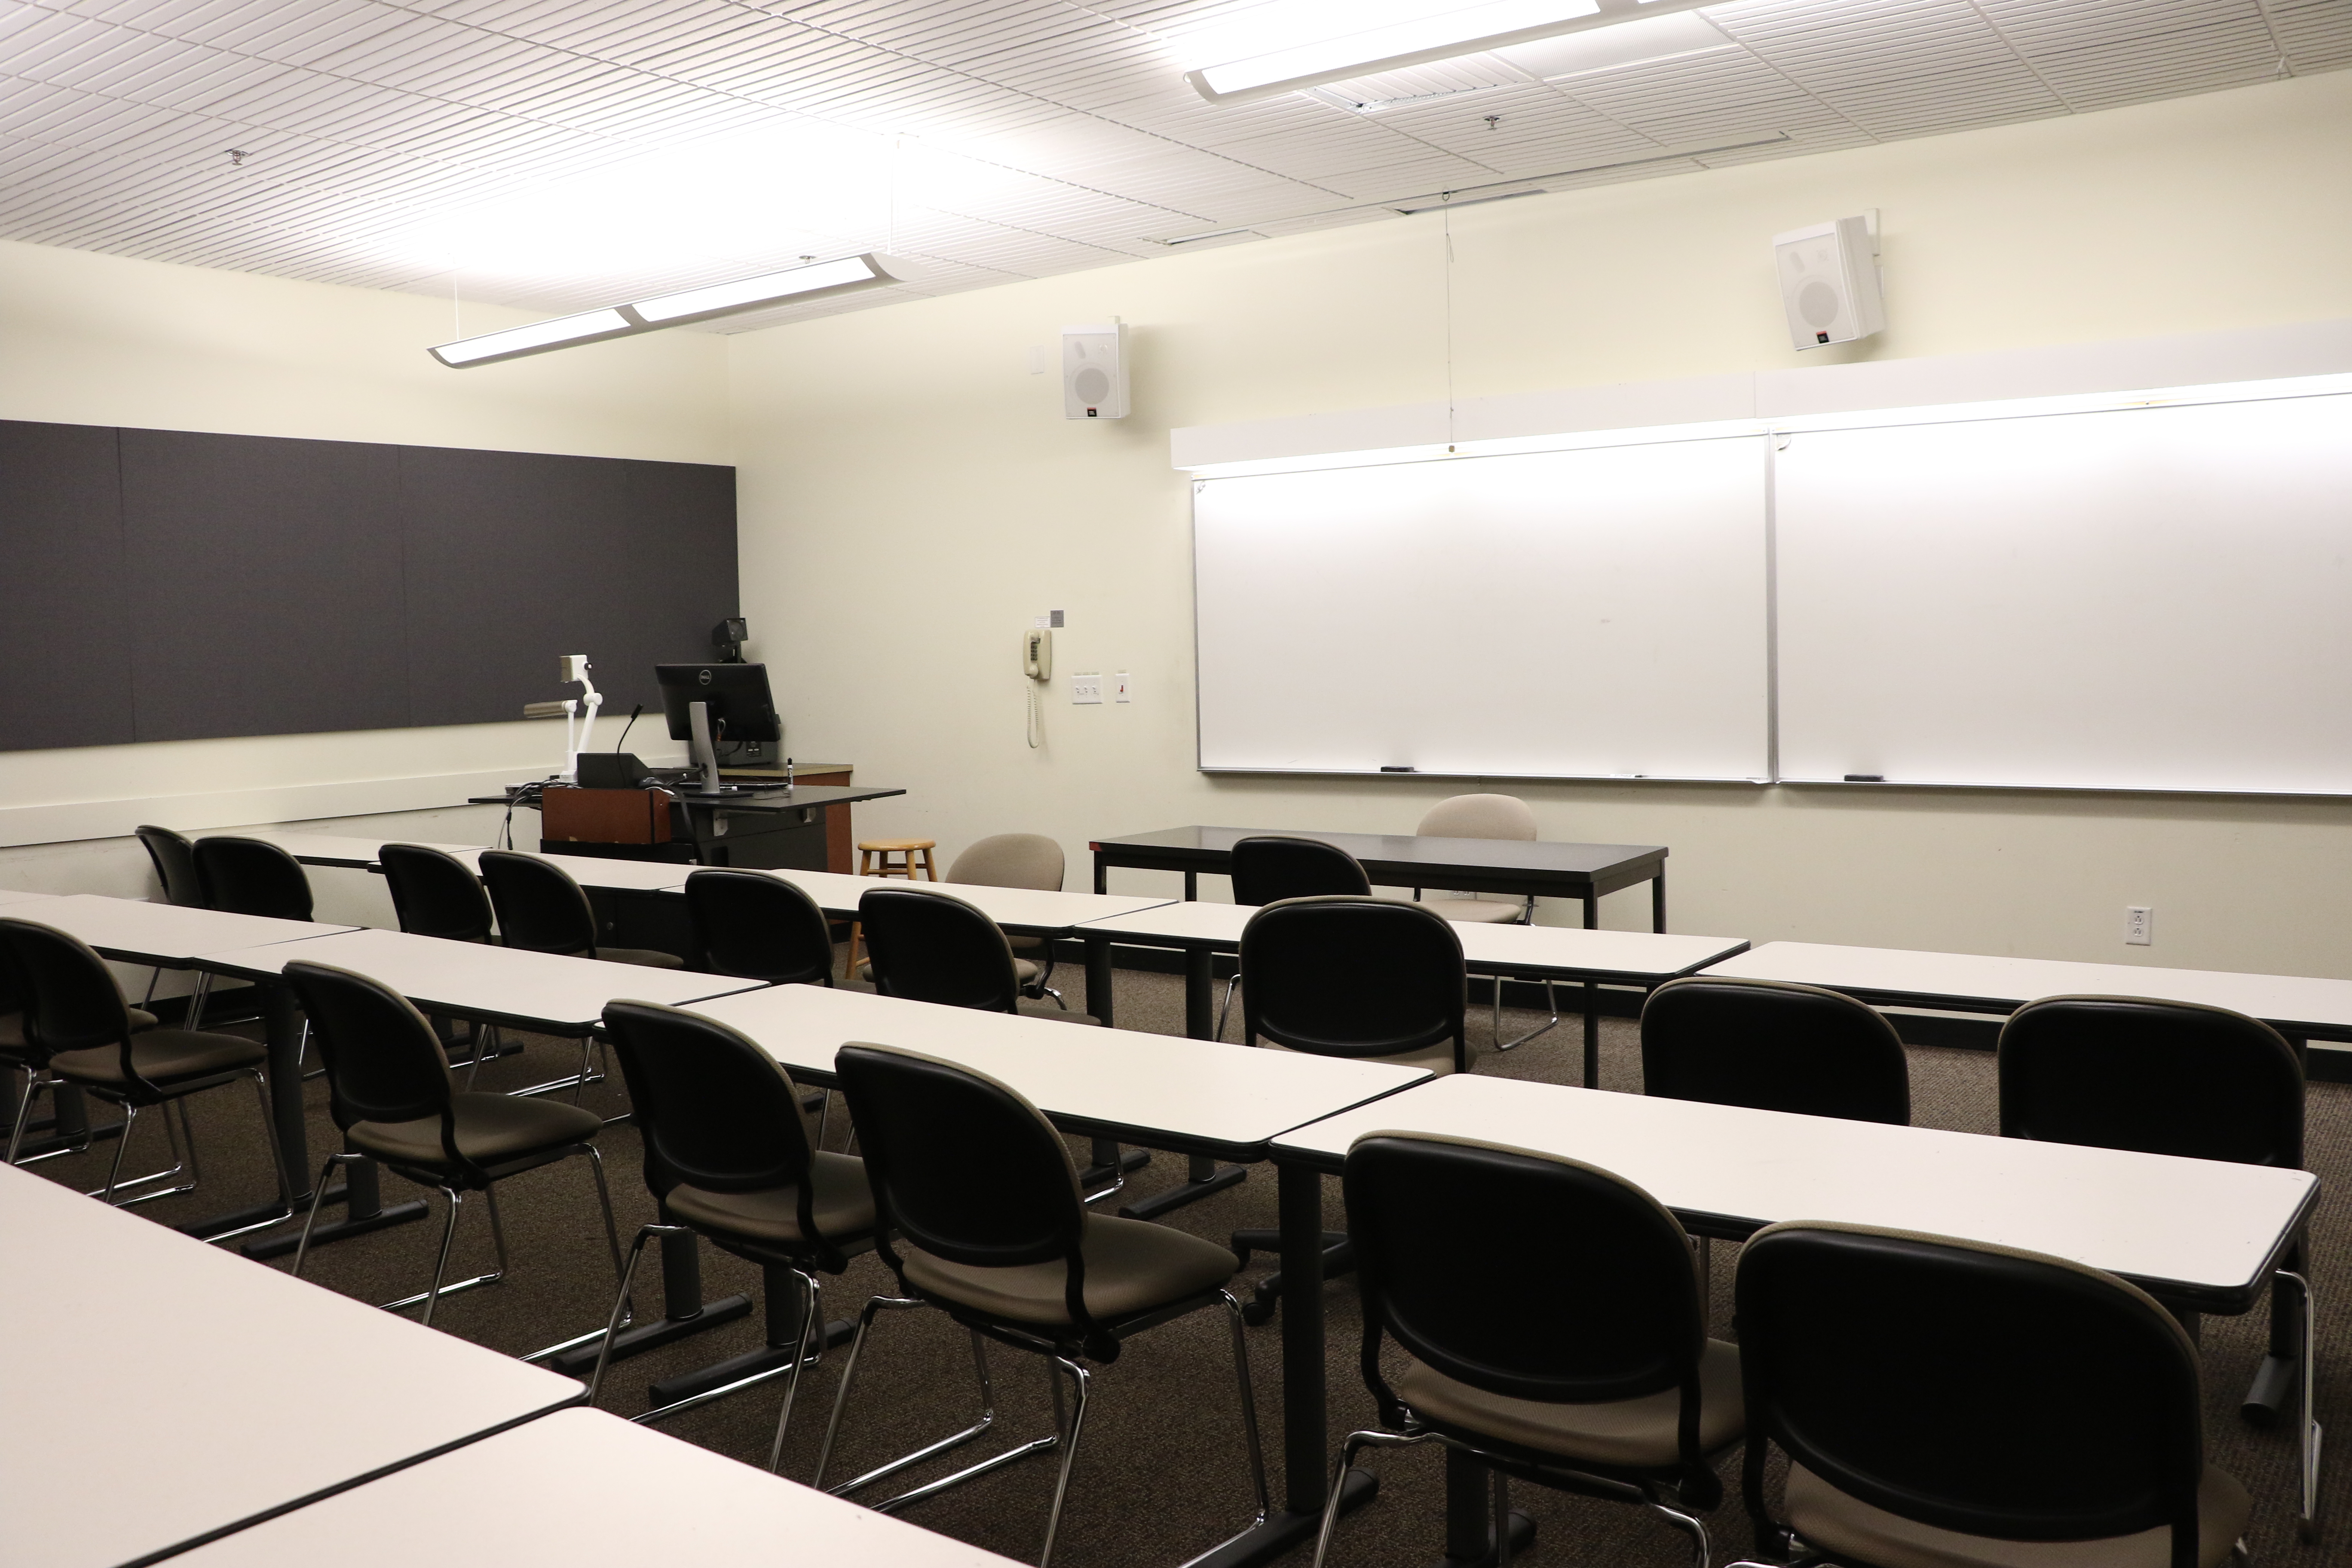 Room consists of carpet, moveable tables and chairs and a table, podium and whiteboard located at the front of the room. 